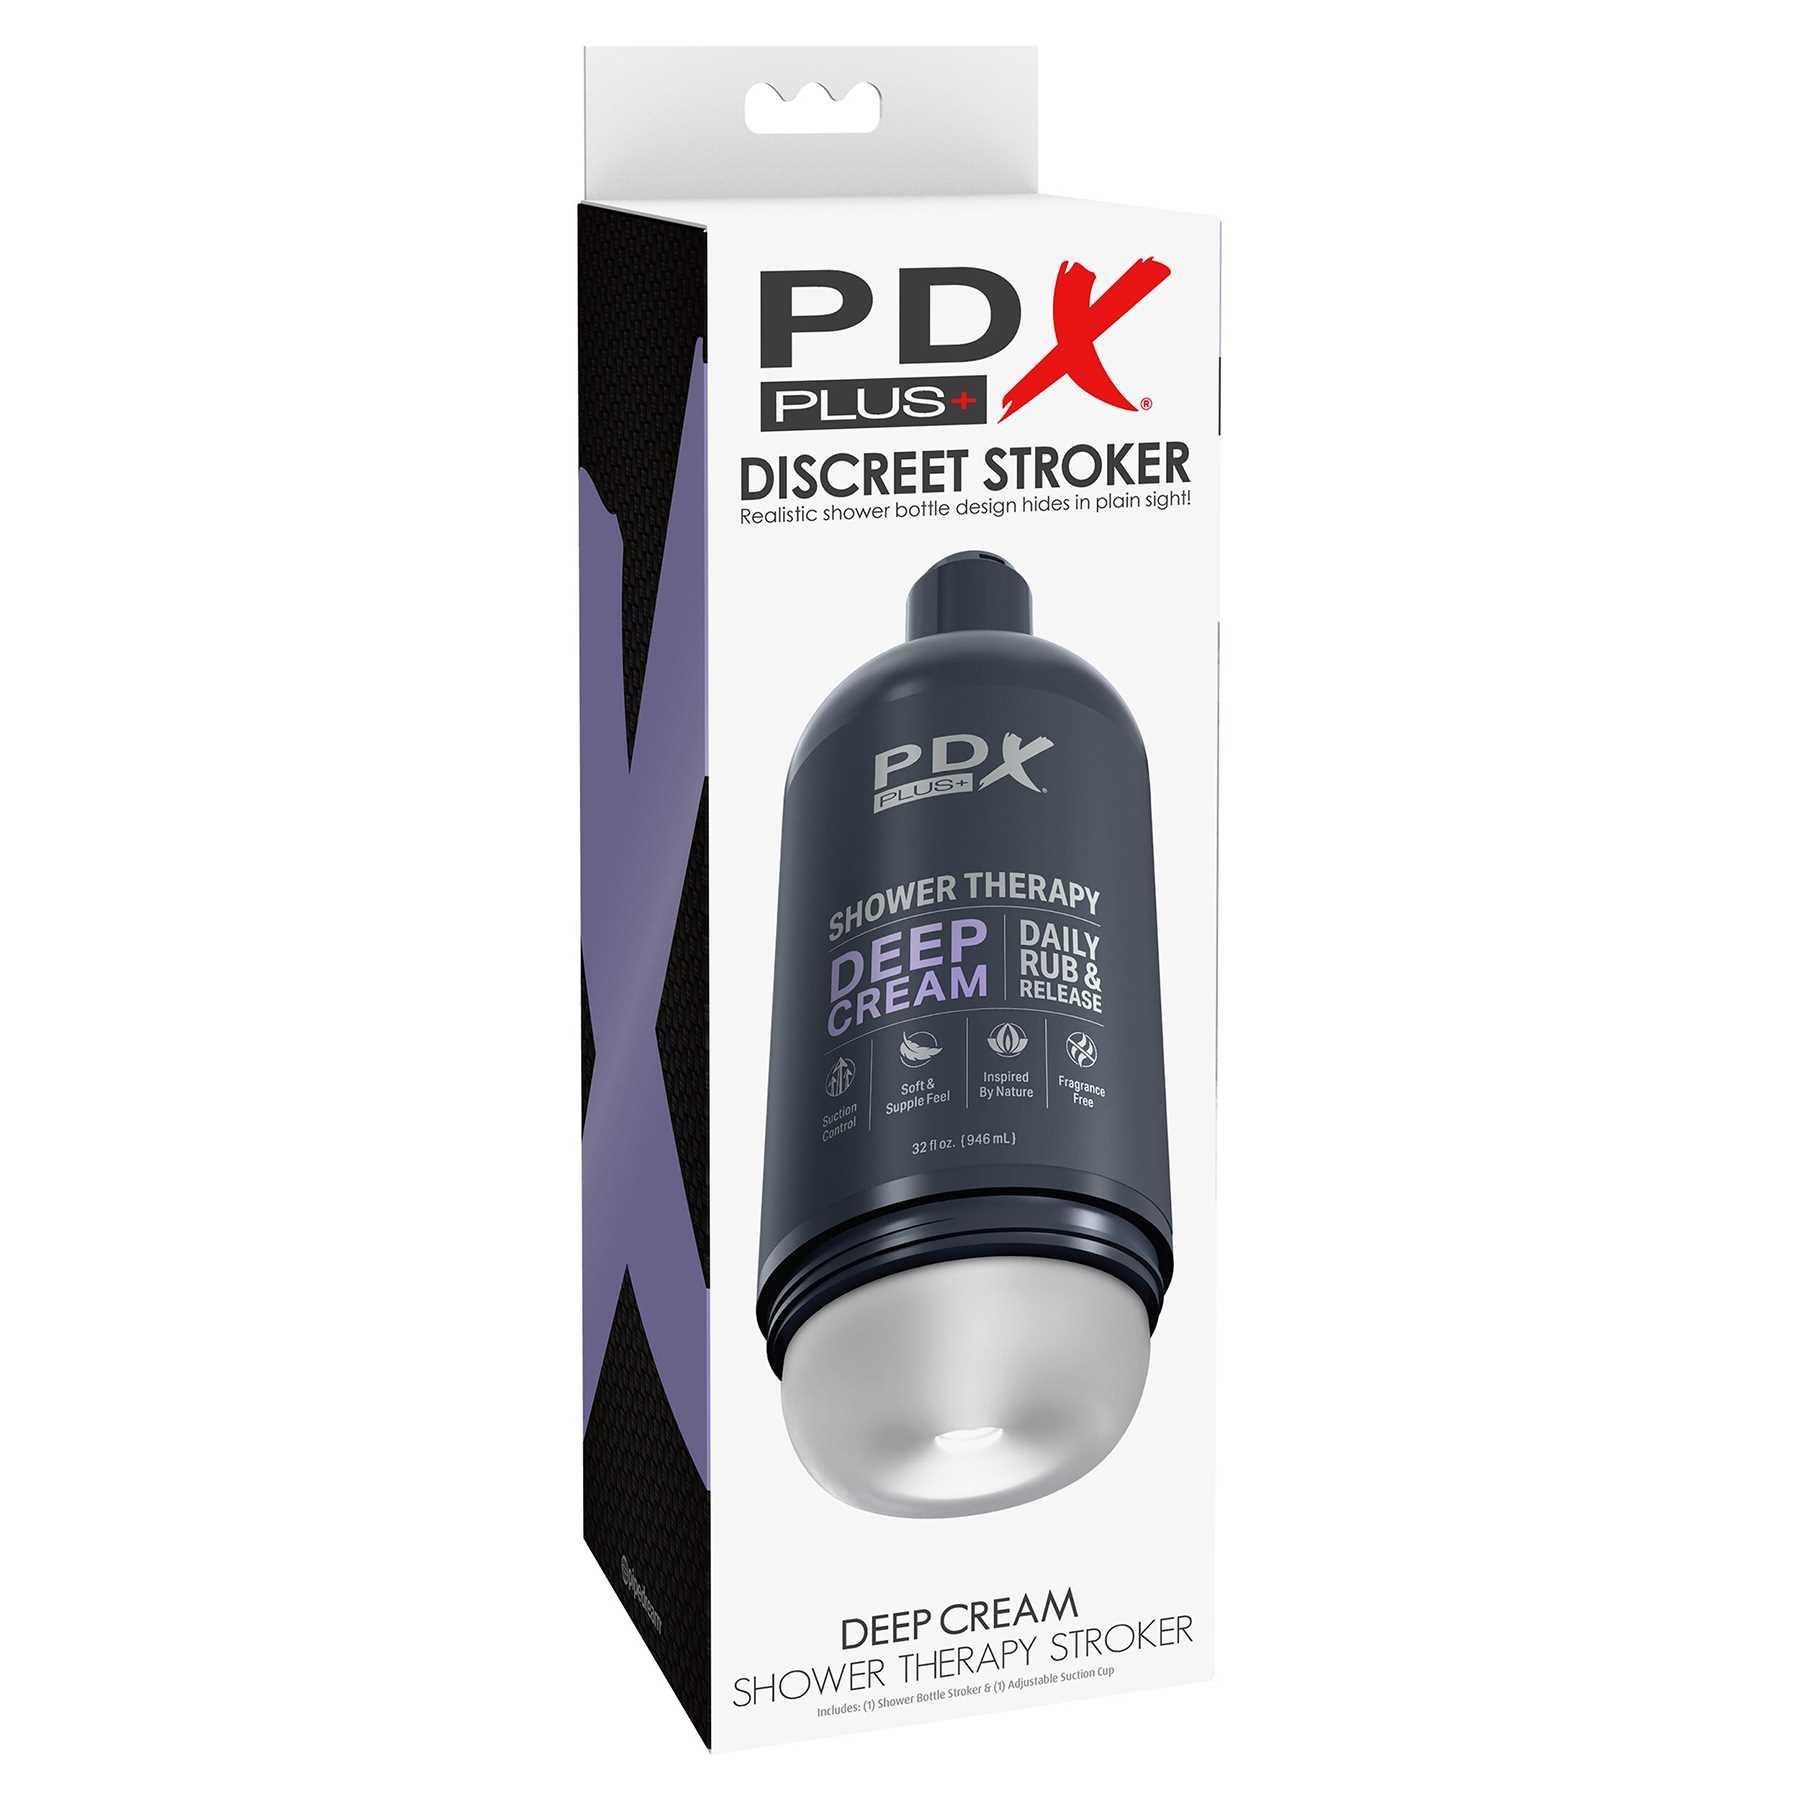 PDX Plus Shower Therapy Deep Cream Discreet Stroker package